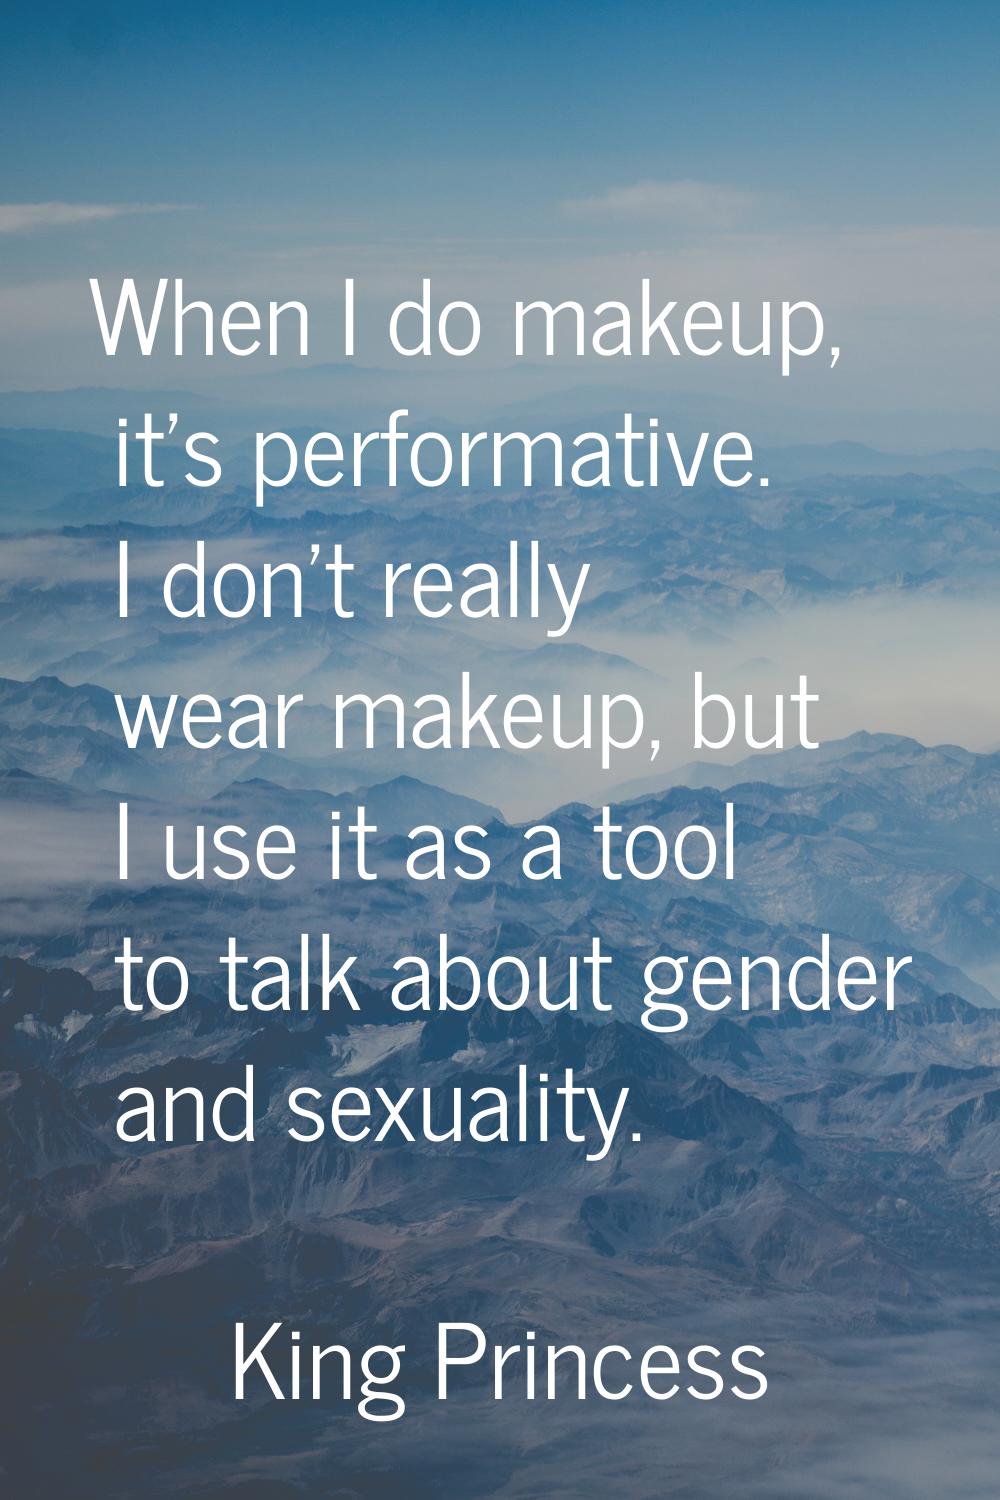 When I do makeup, it's performative. I don't really wear makeup, but I use it as a tool to talk abo